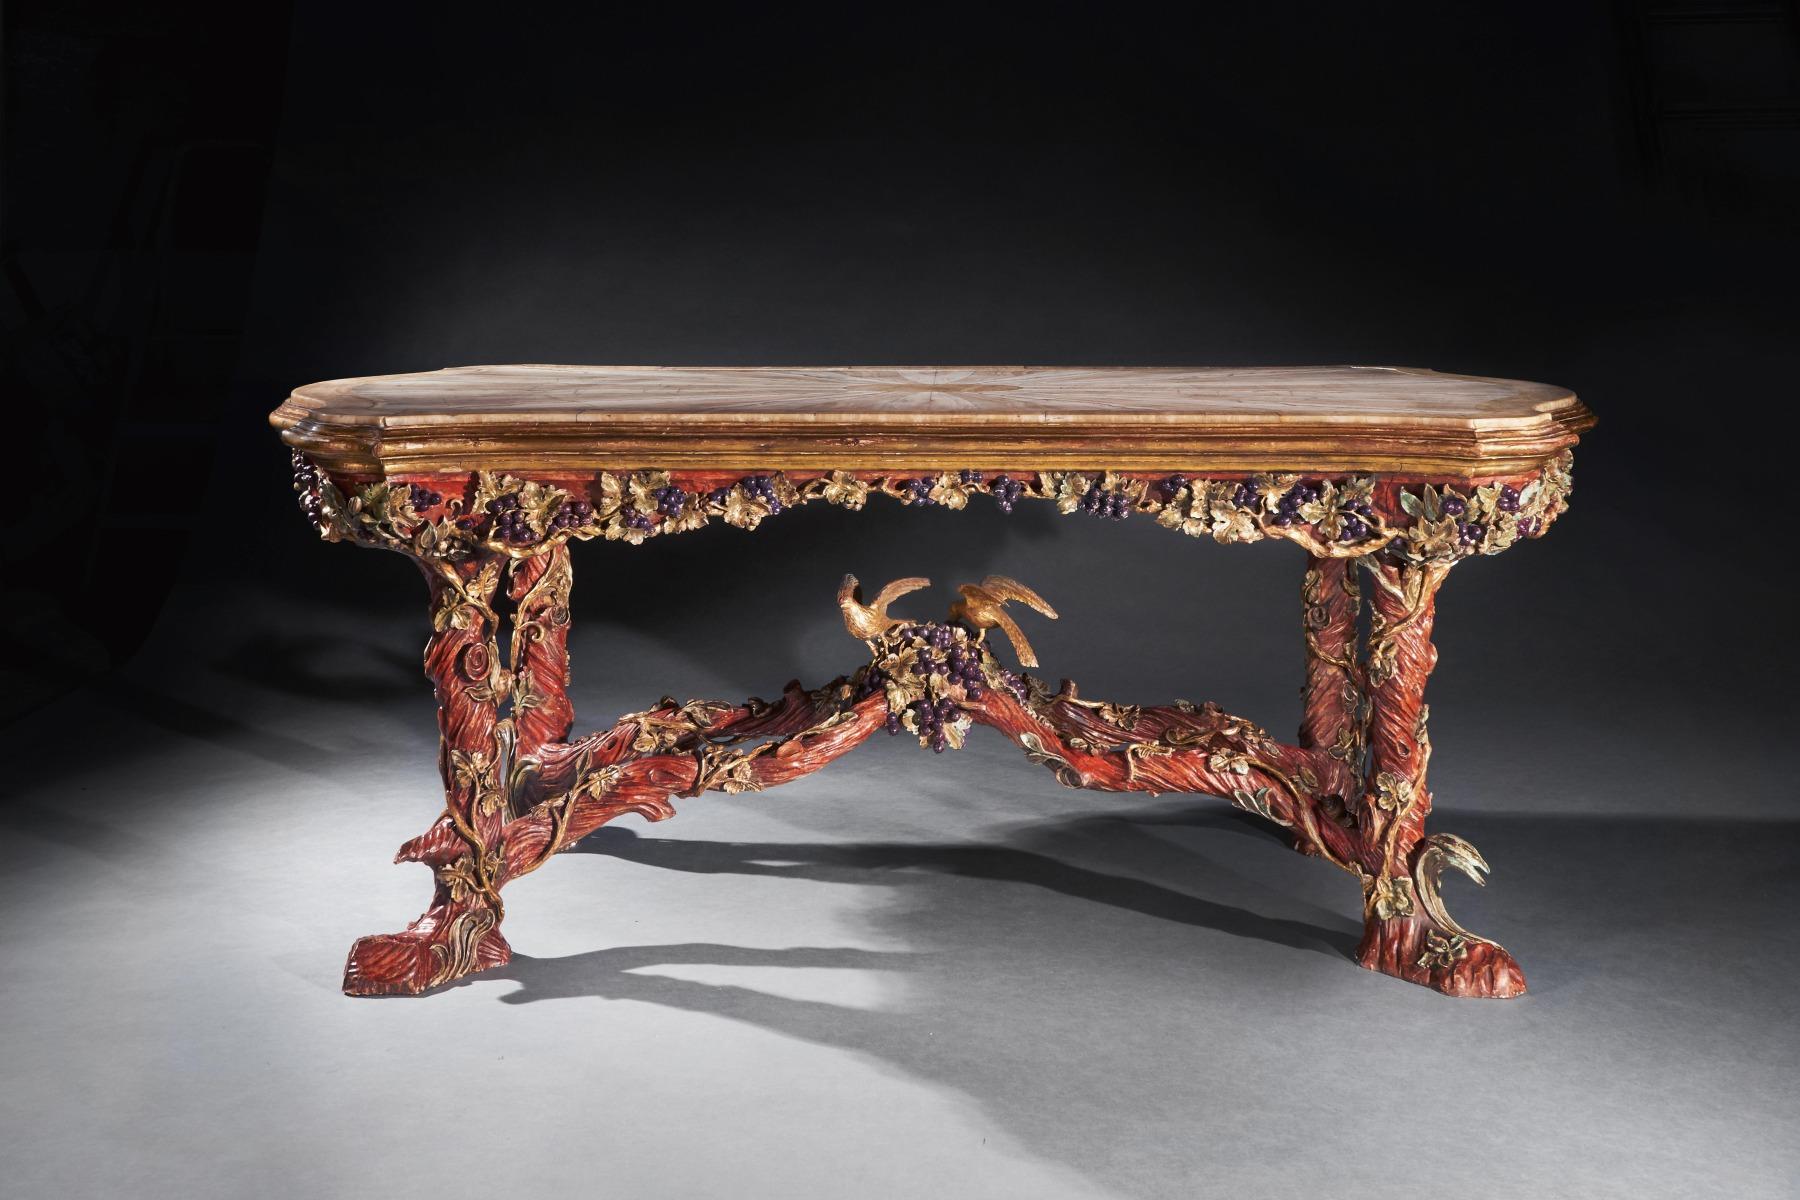 Outstanding Italian Carved Wood Polychrome Centre Table with Onyx Top by Amulet  For Sale 4